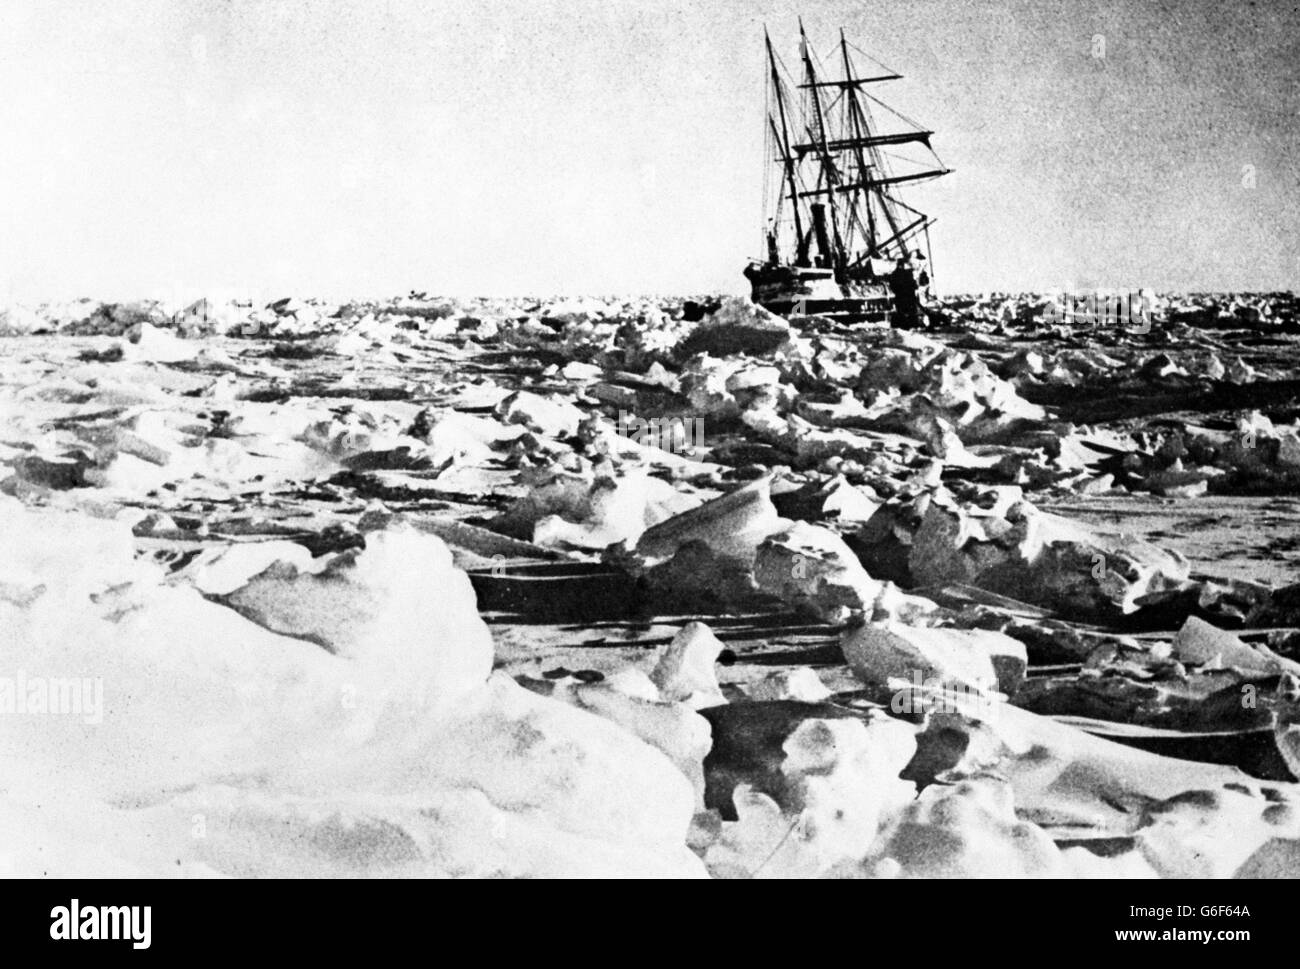 Shackleton Expedition - Endurance - Antarctica. Ernest Shackleton's ship Endurance trapped in ice during an expedition to the Antarctic. Exact date unknown. Stock Photo